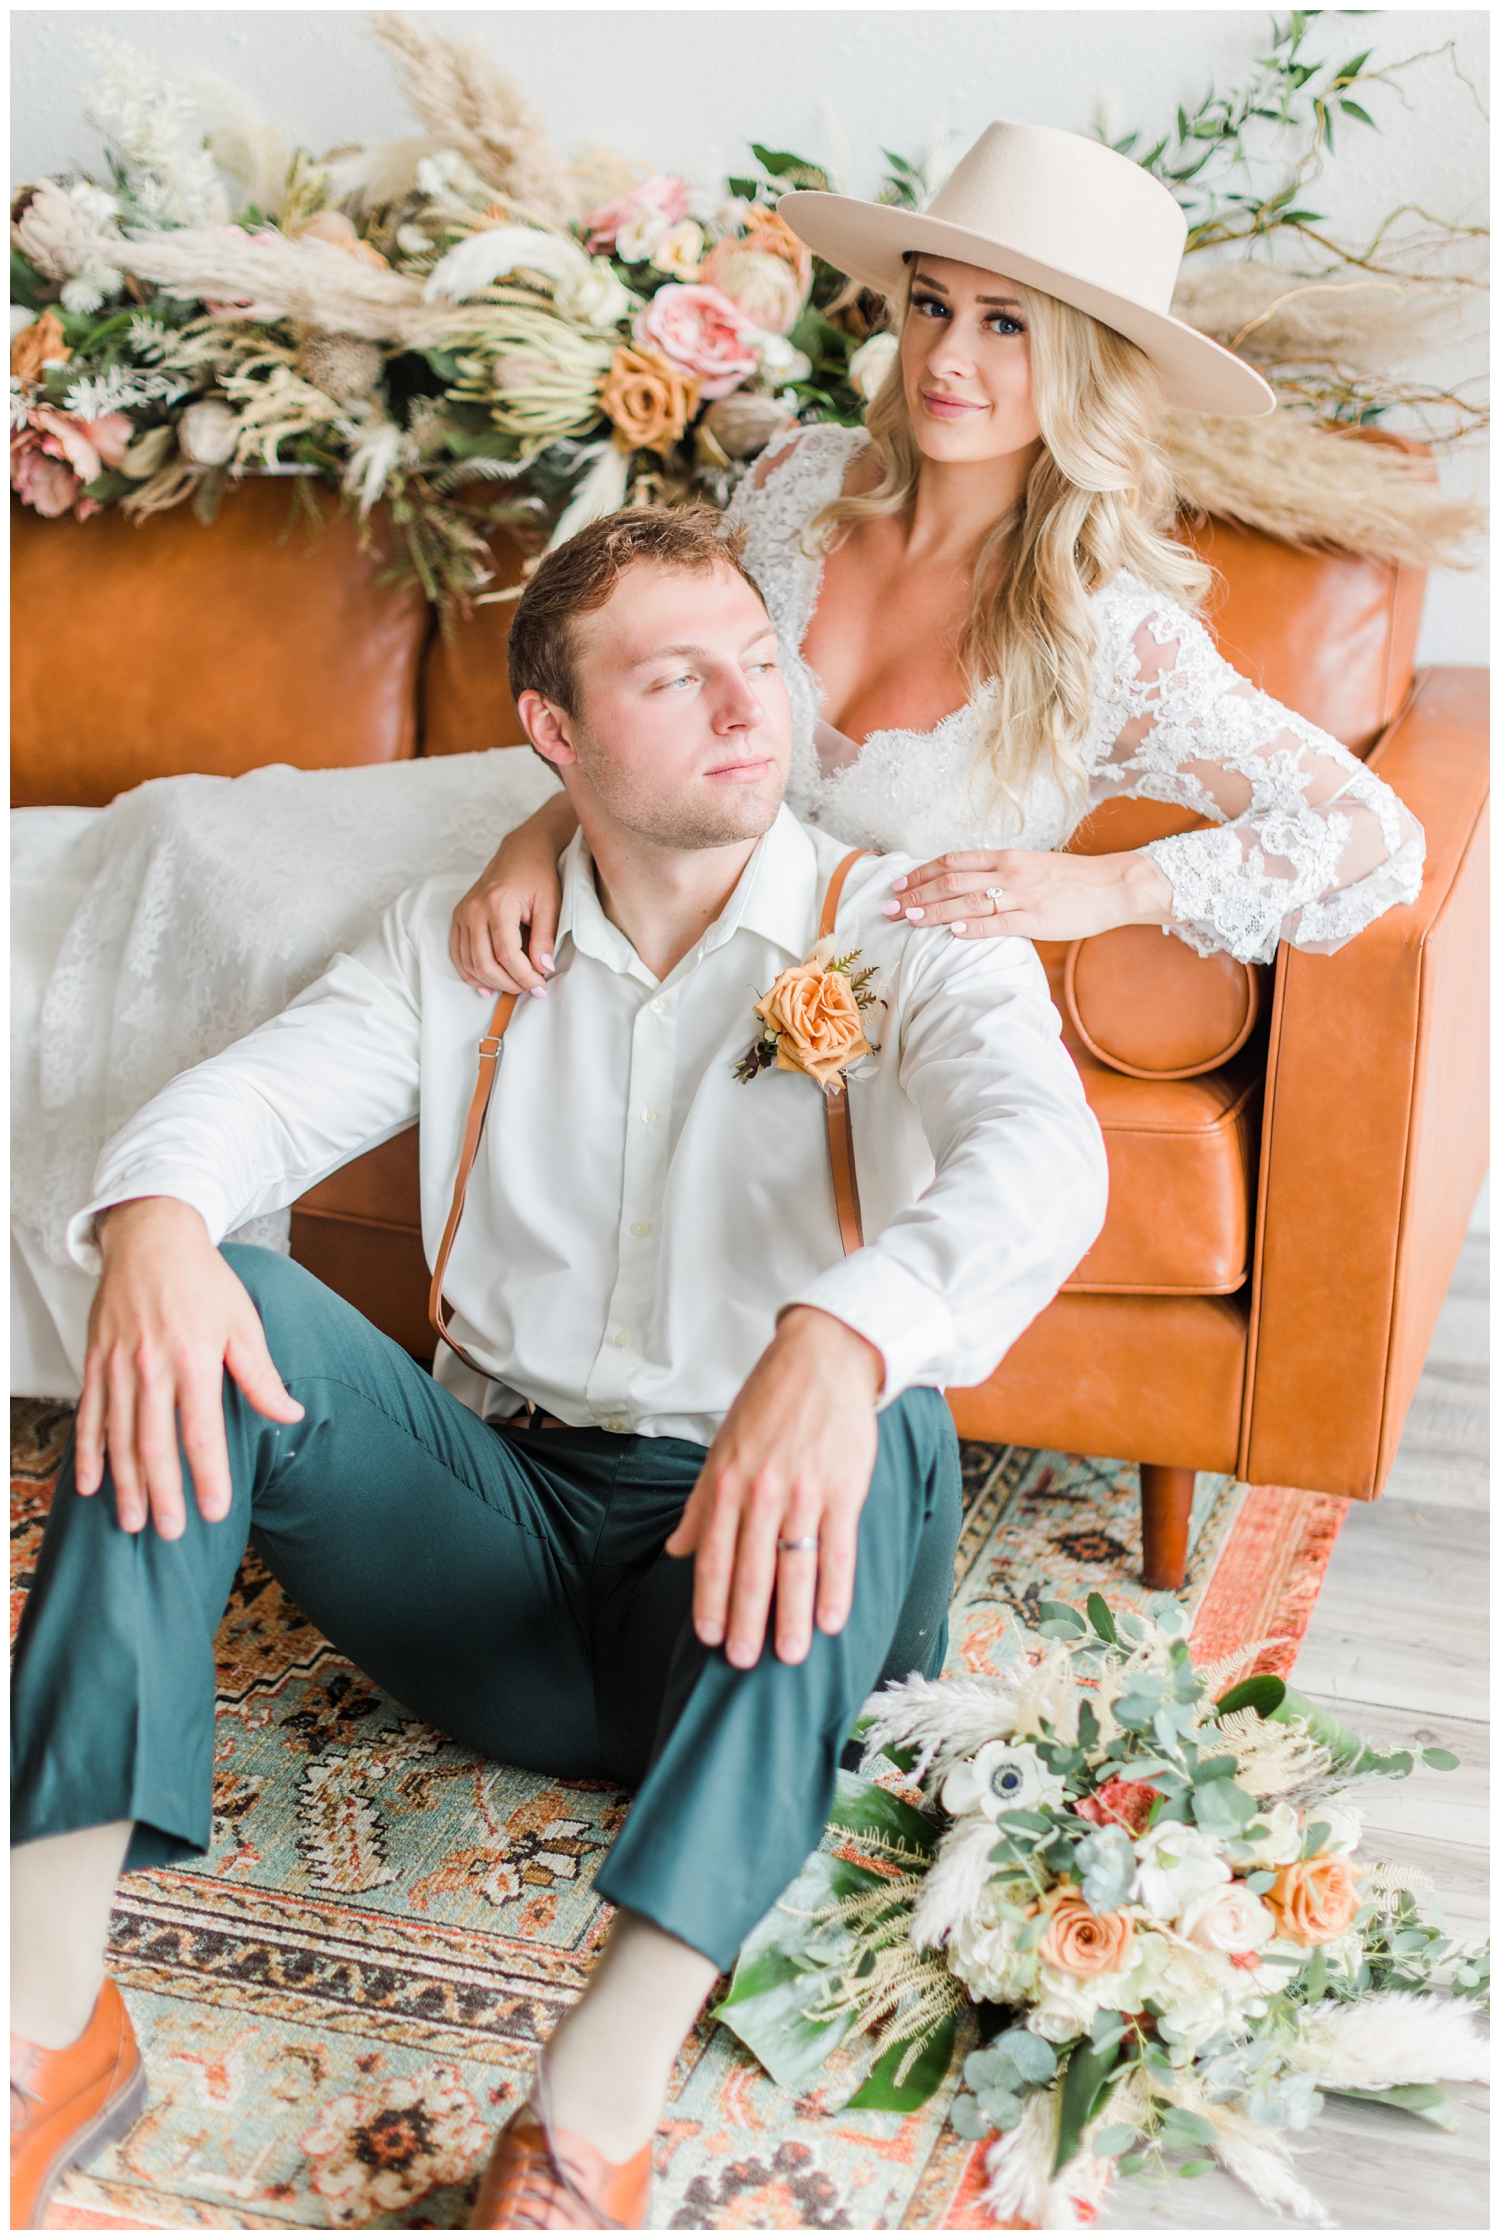 Boho bride and grown lounge on a leather couch surrounded by beautiful boho florals | CB Studio